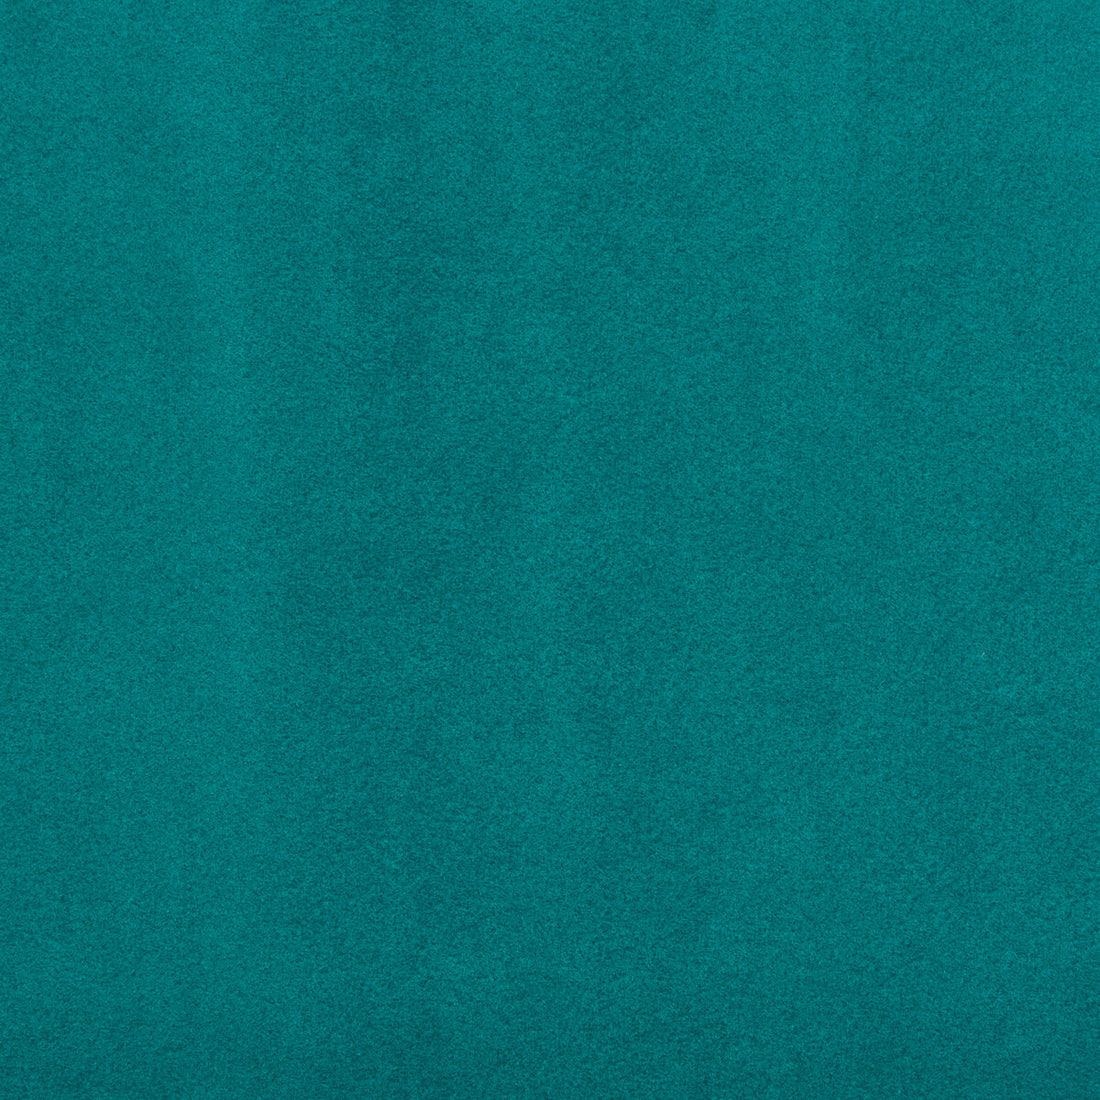 Ultrasuede Green fabric in teal color - pattern 30787.3535.0 - by Kravet Design in the Performance collection